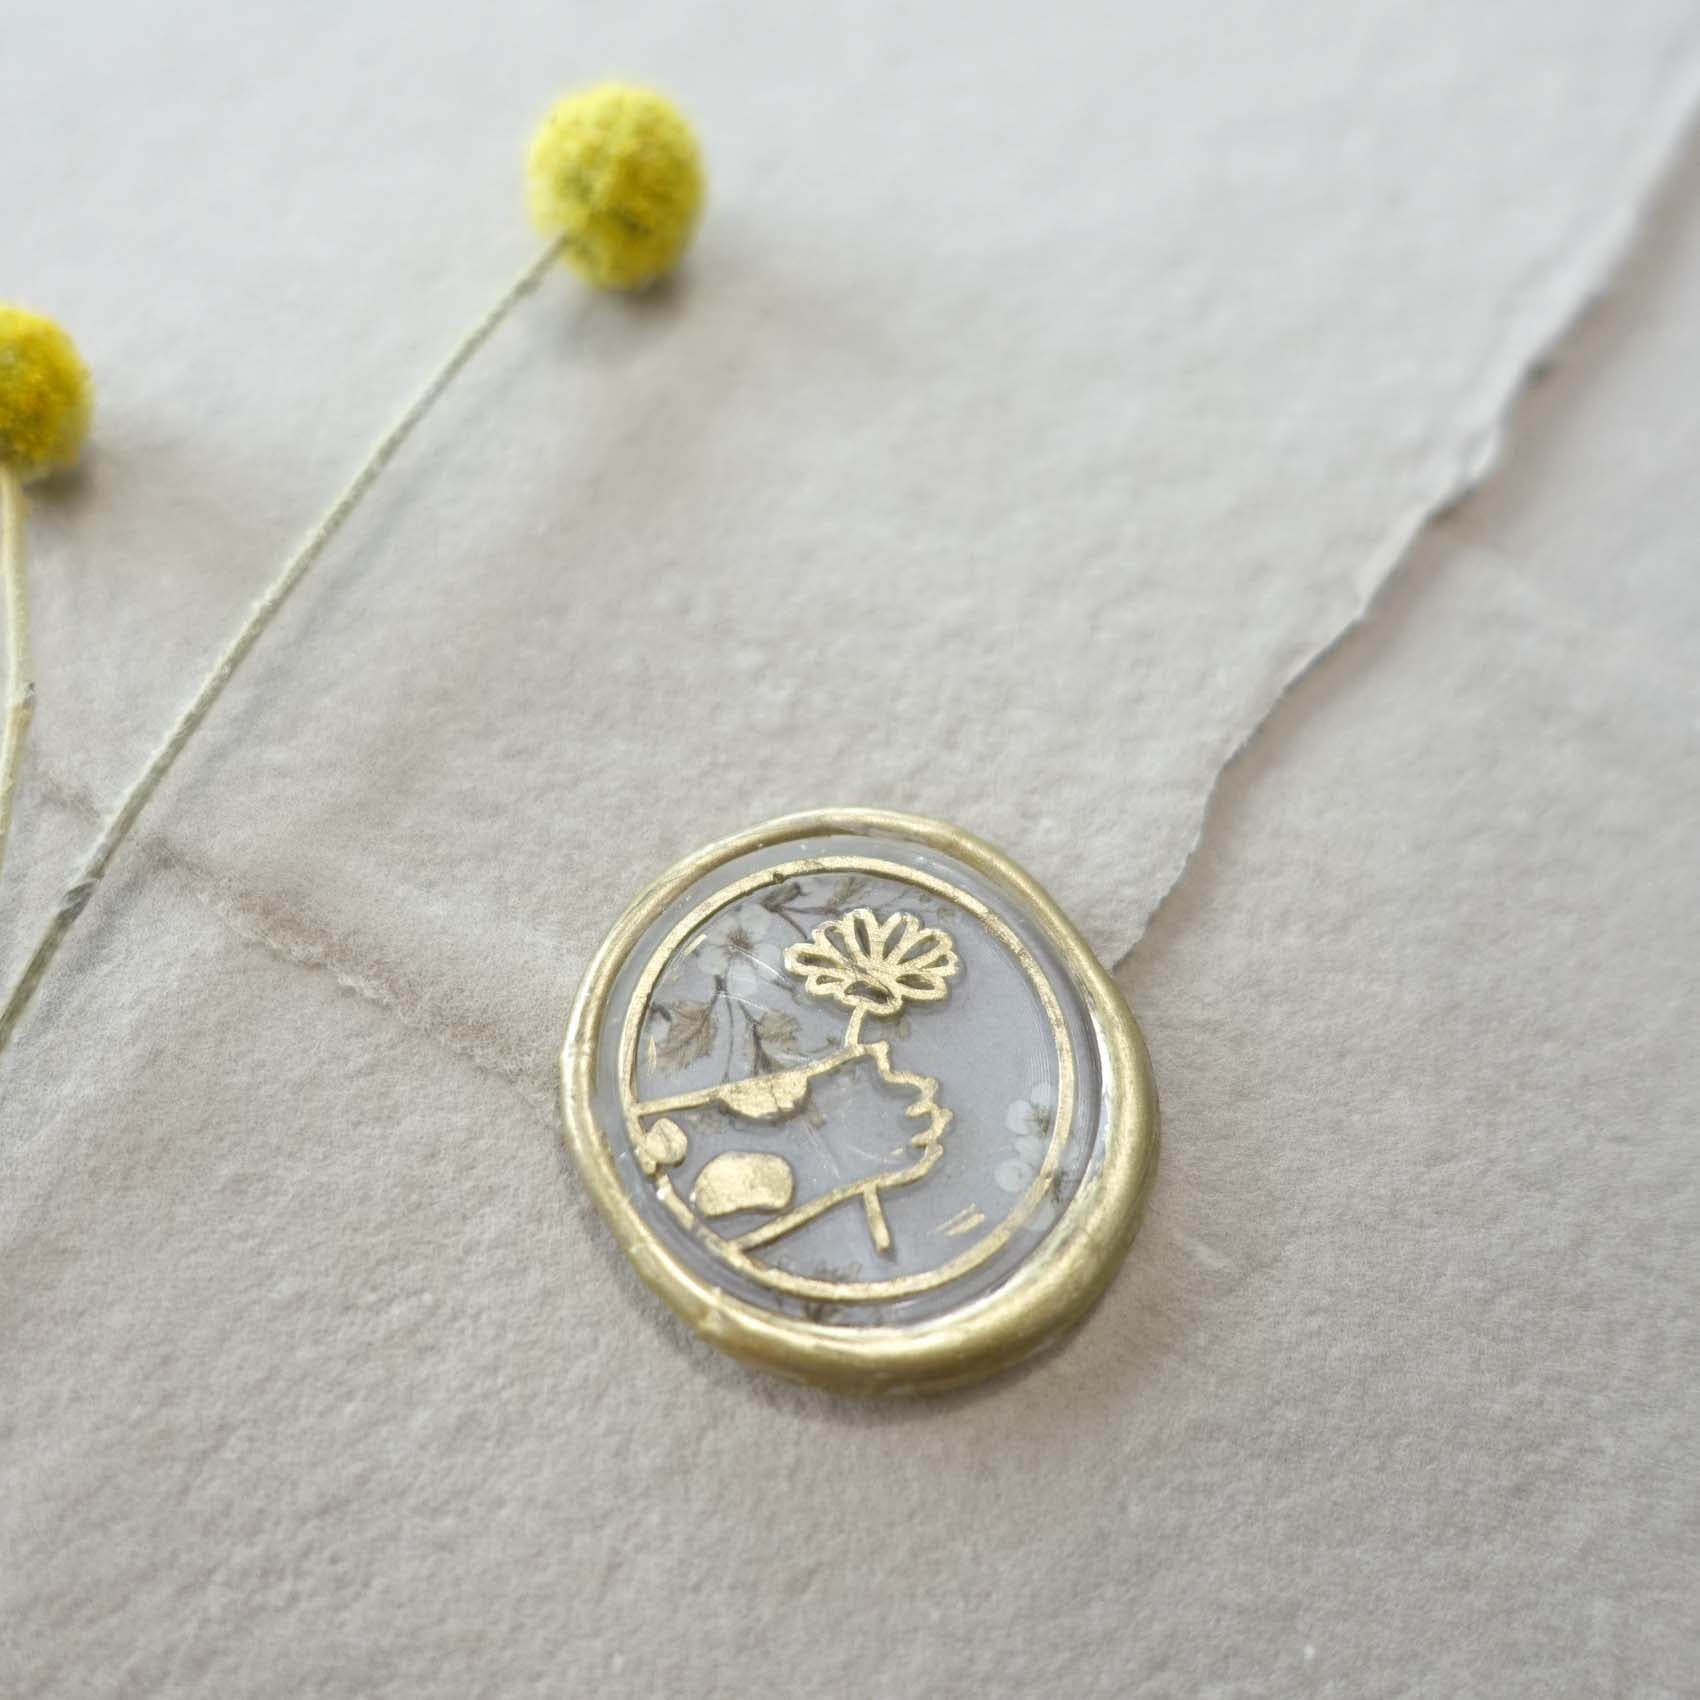 Paw Holding Flower wax seal stamp, wax seal kit or stamp head